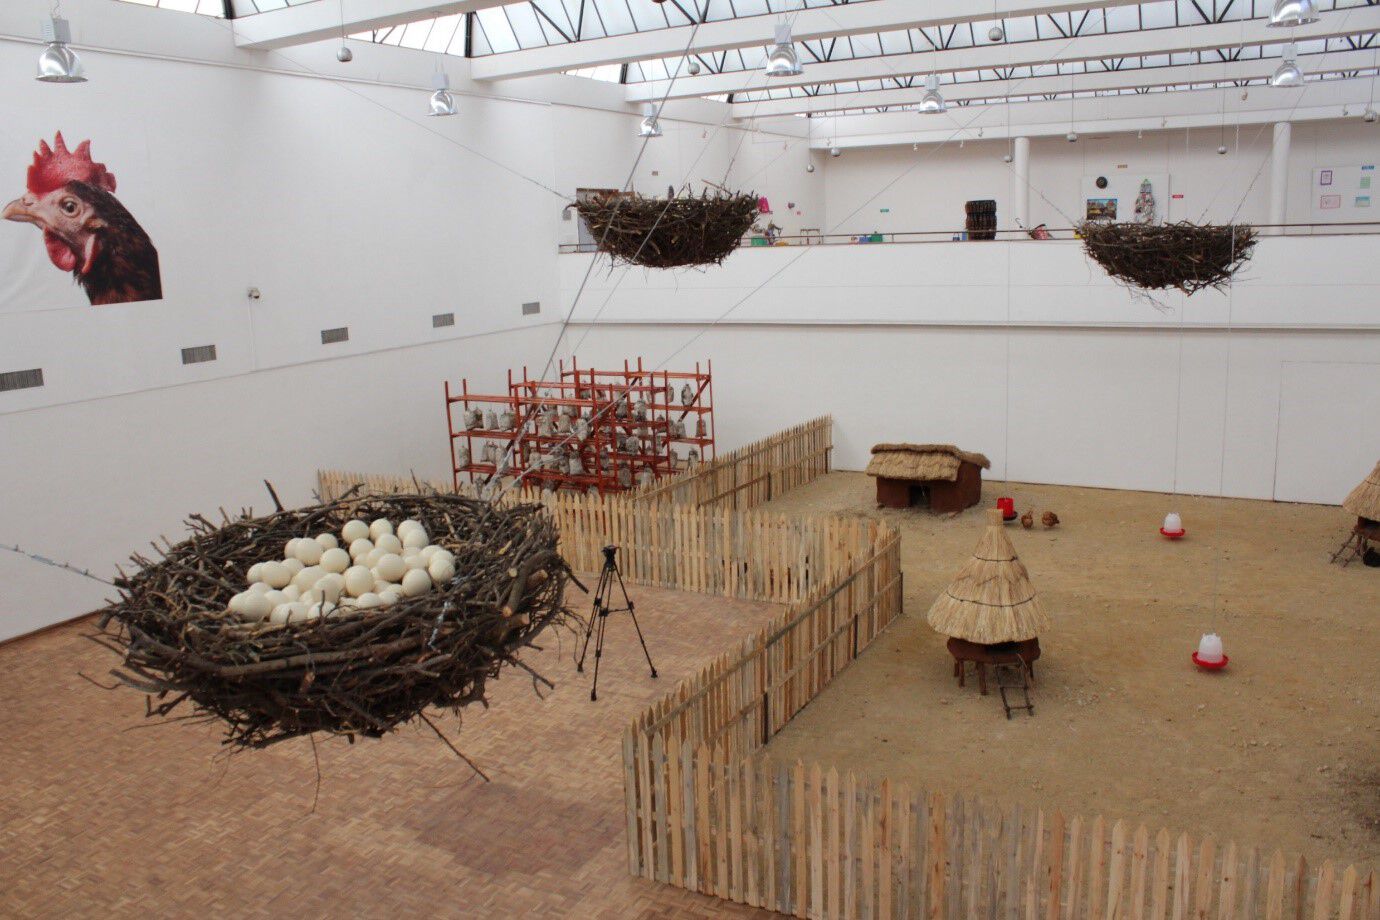 A elevated view of the installation that resemebles a farmhouse with the mushroom production on the left and three gigantic chicken nest hanging from wires